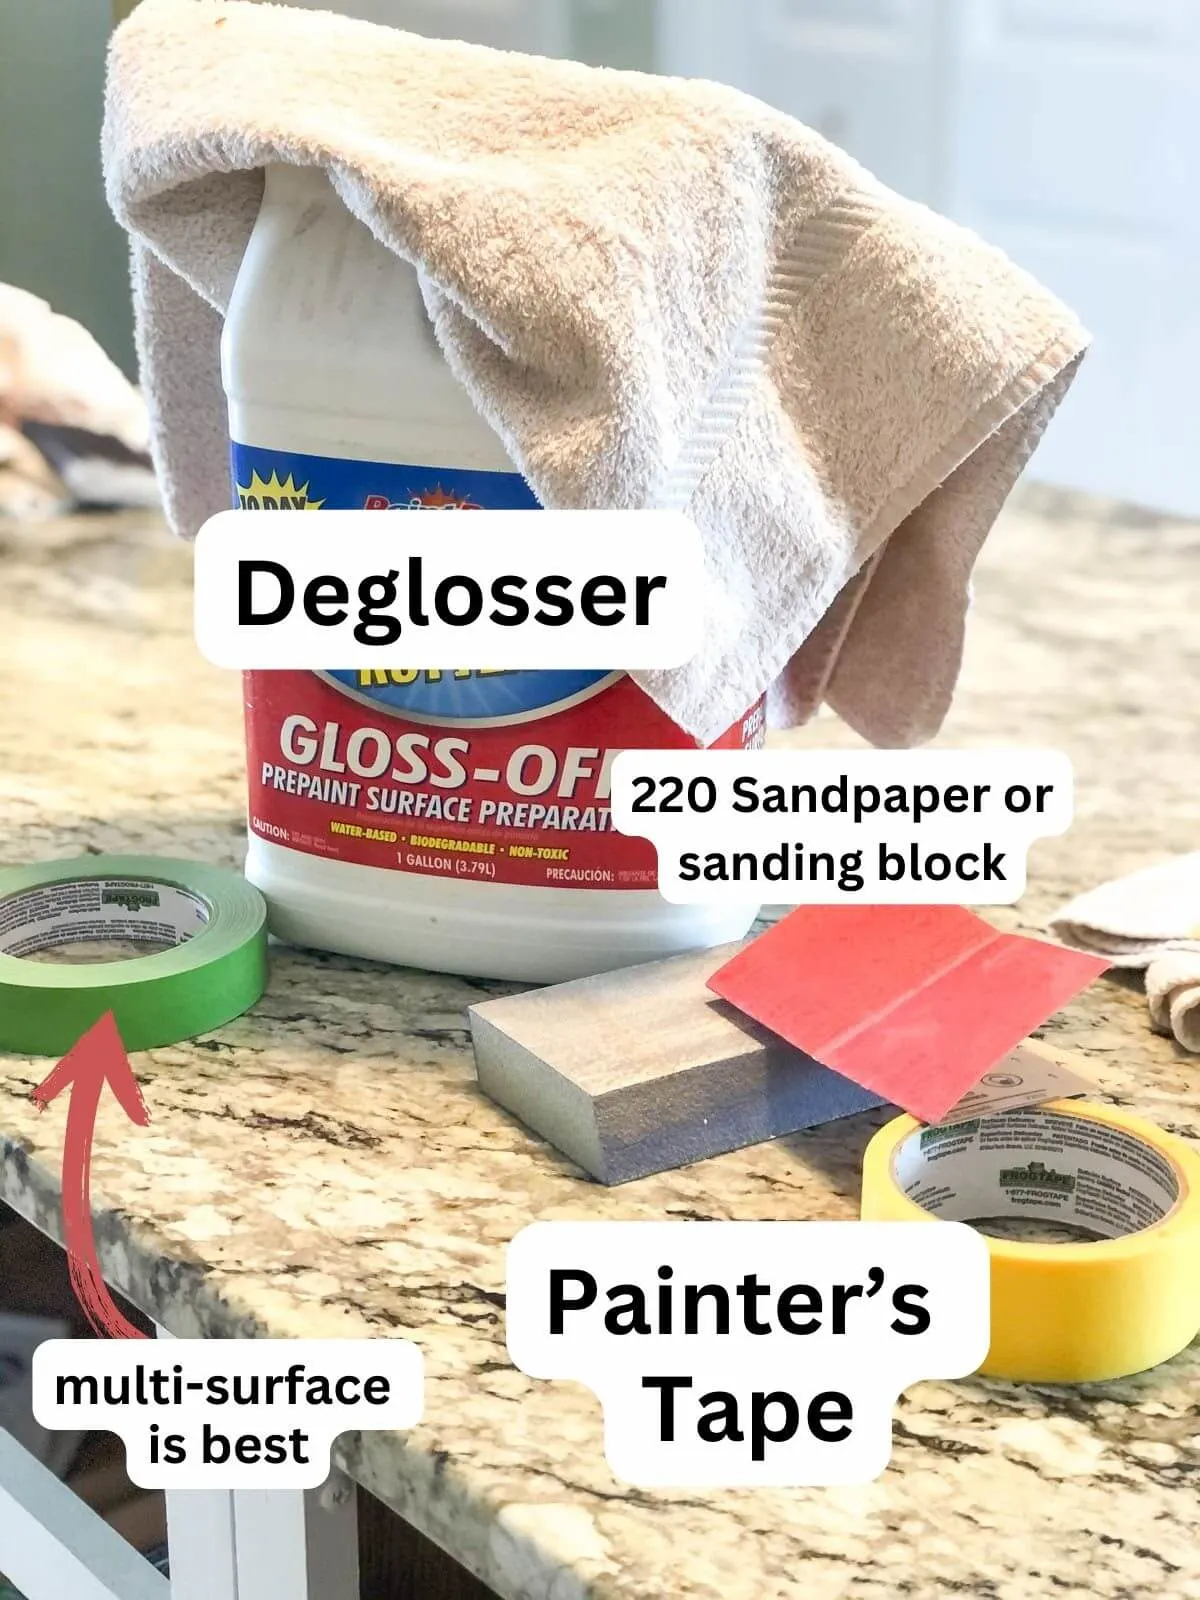 painter's tape, sand paper, deglosser on granite counter in kitchen with labels.